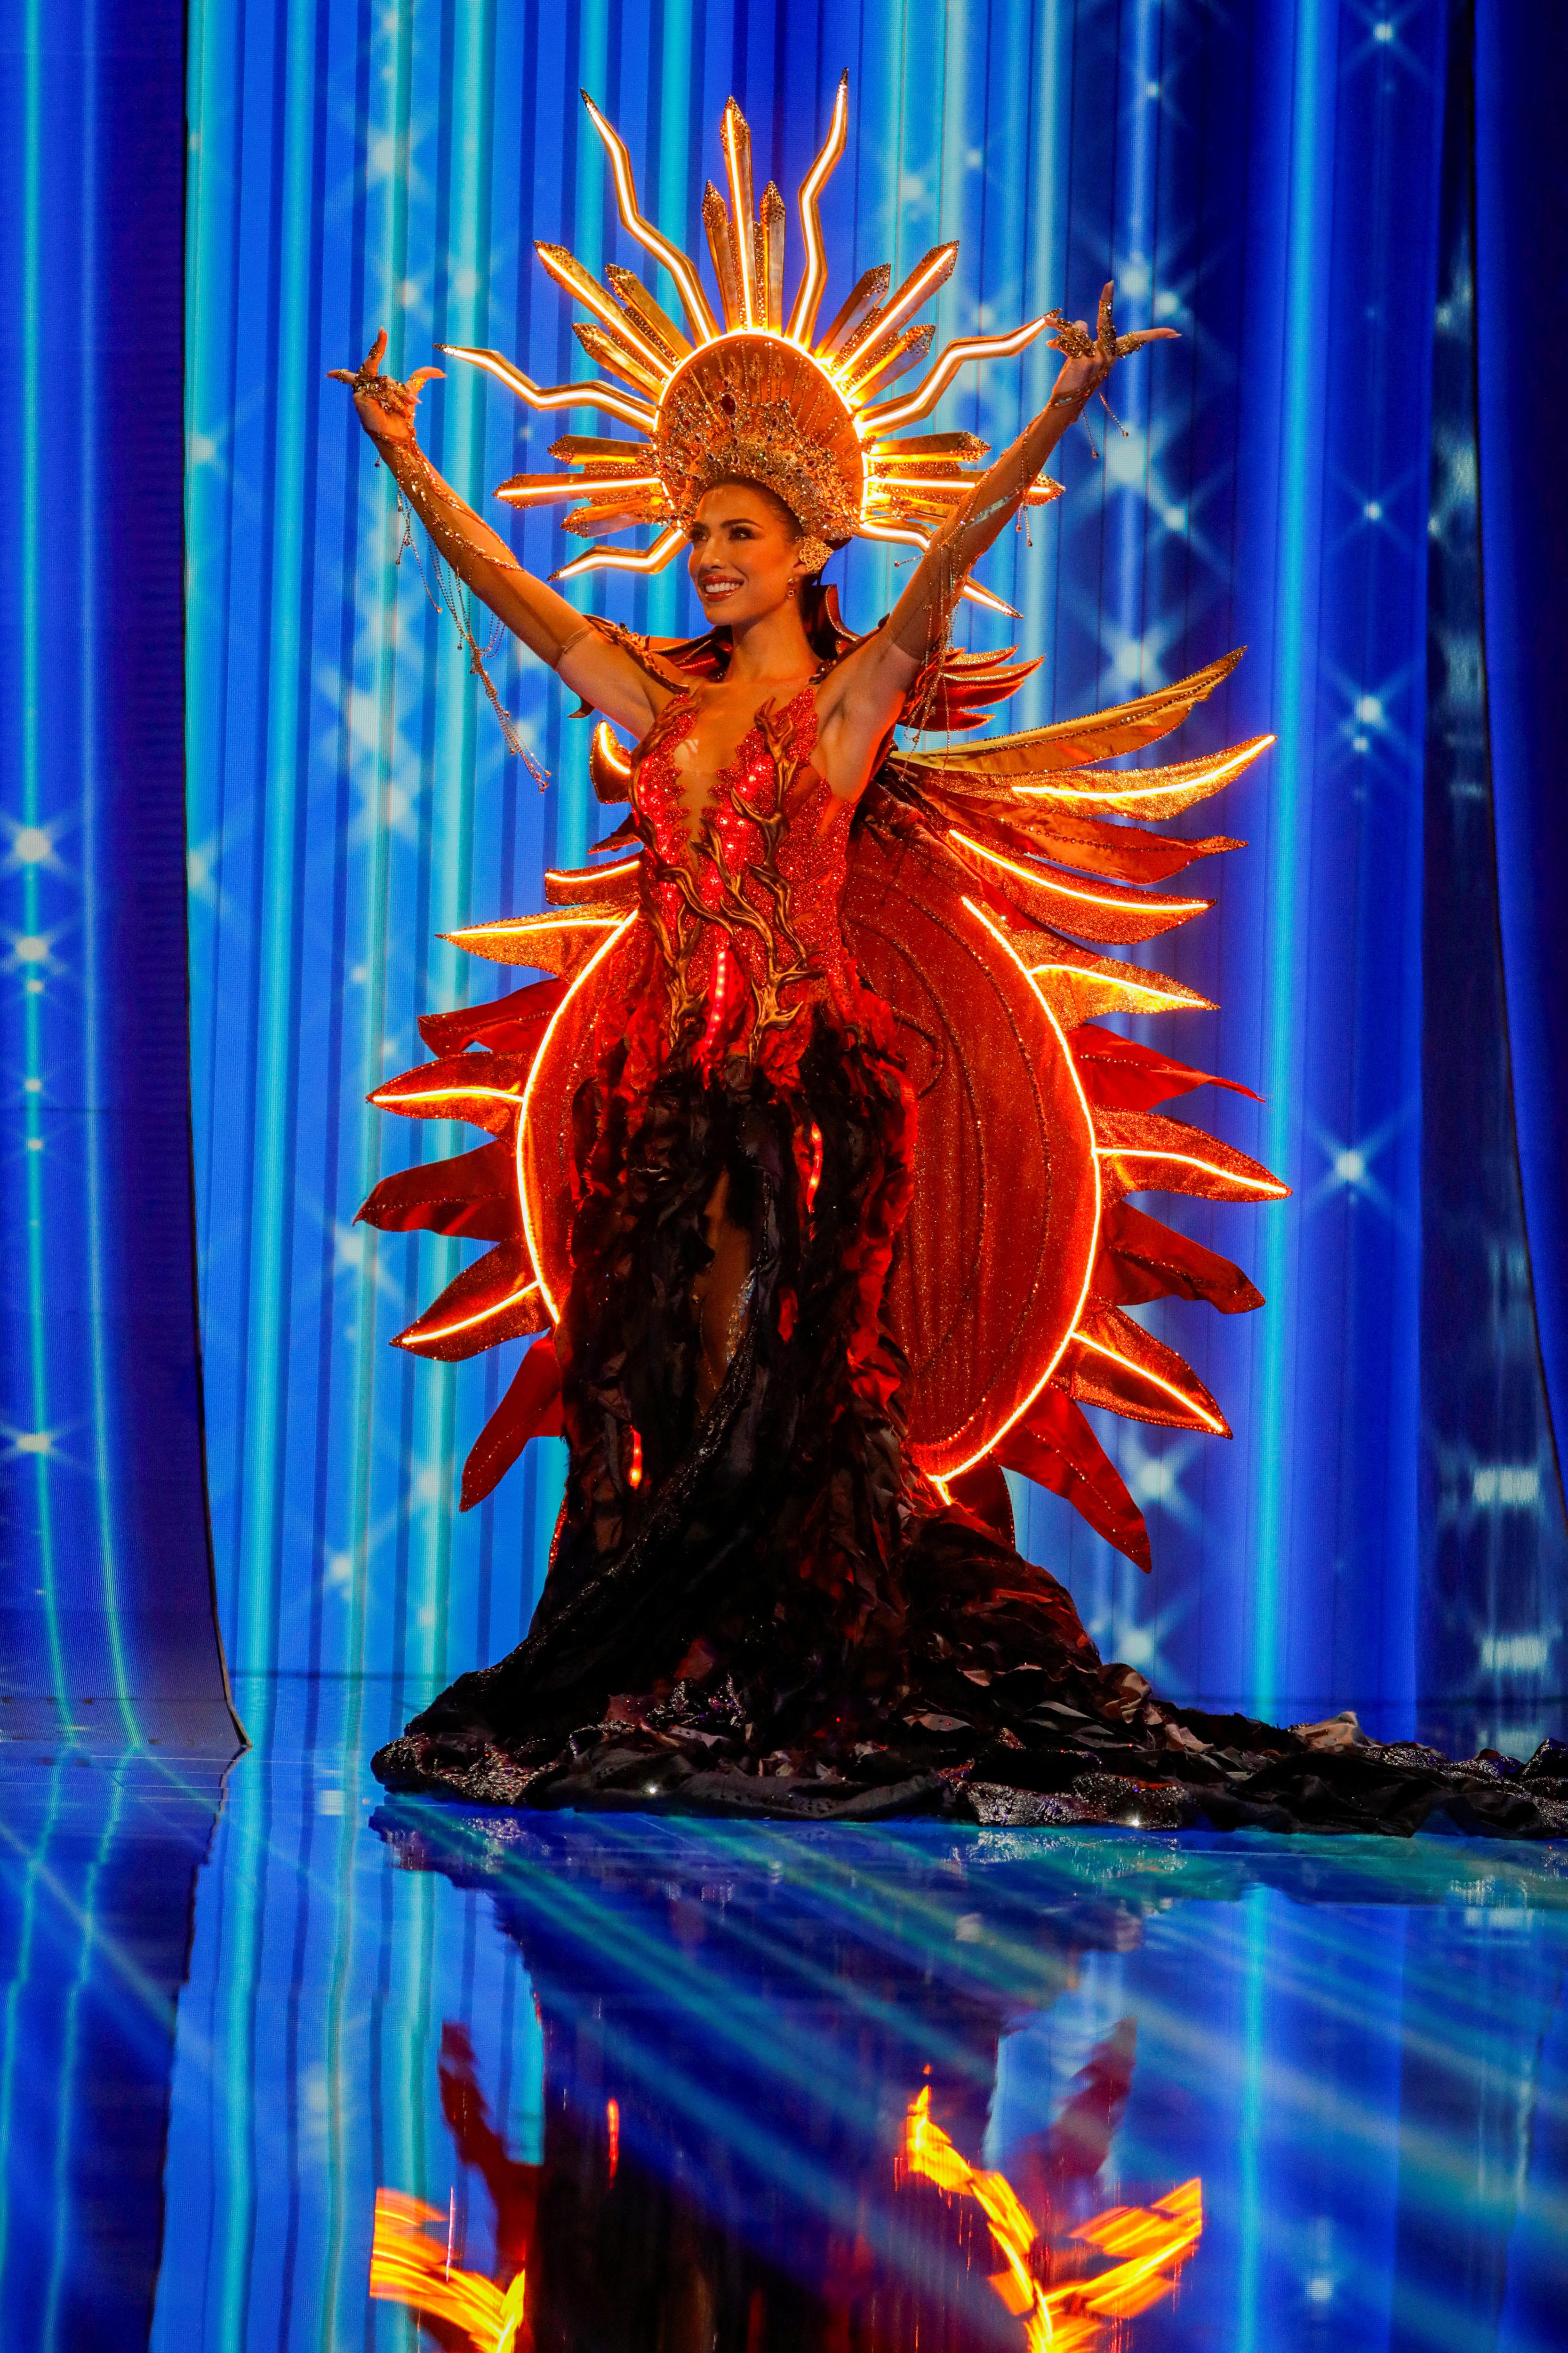 Isabella Garcia-Manzo wearing a headdress that looks like the sun and a long dark red gown, all illuminated